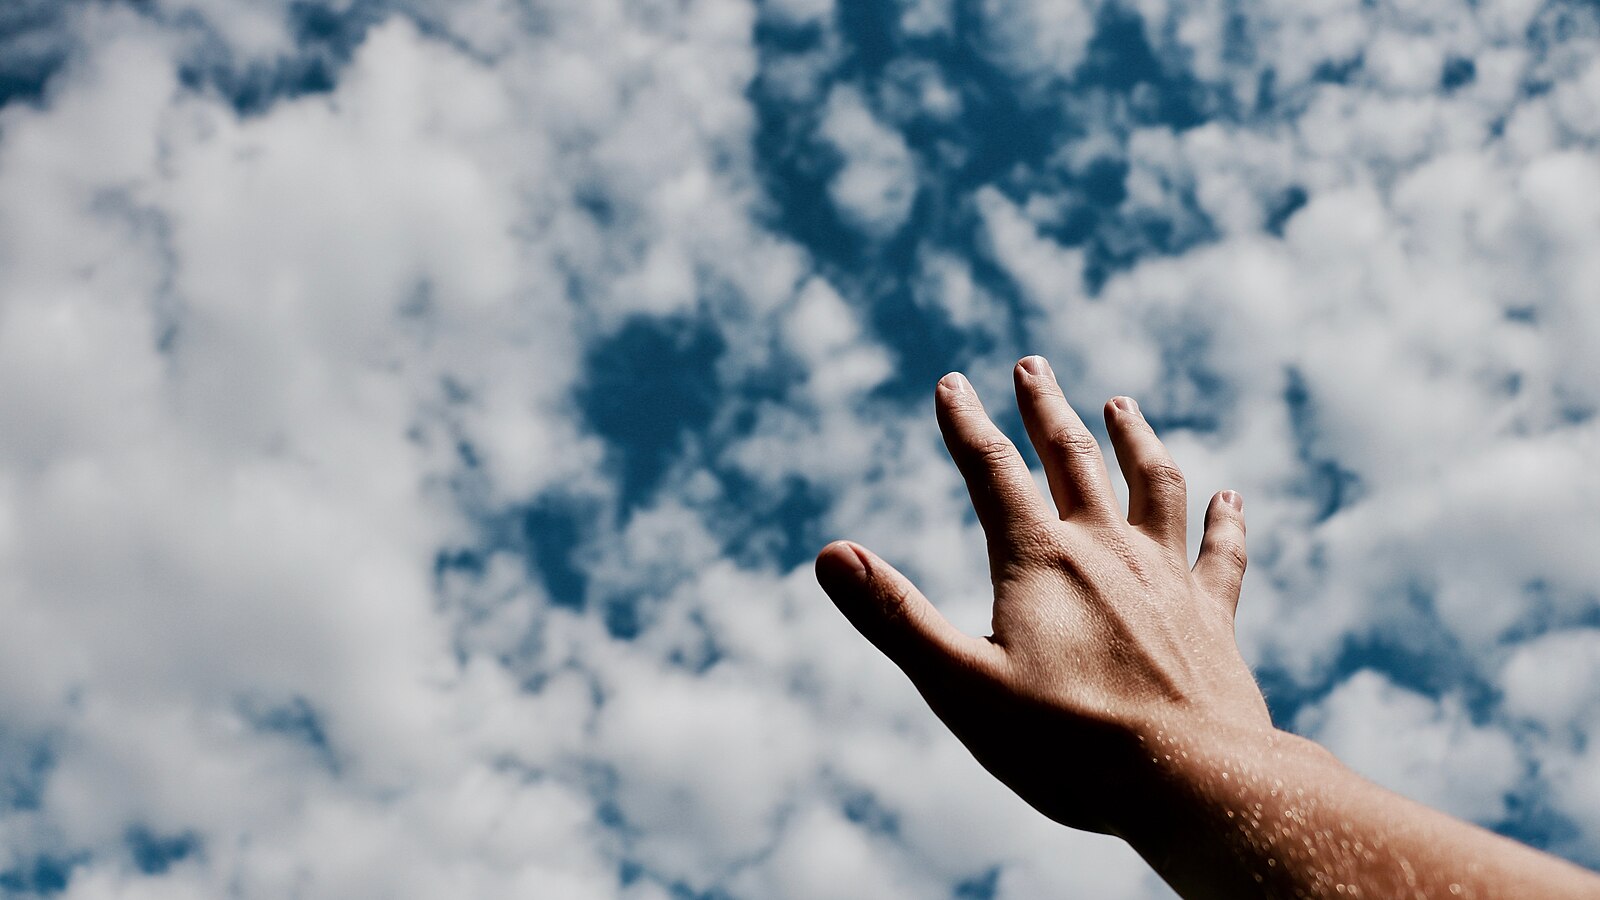 Open palmed hand reaching up towards a blue sky with puffy clouds